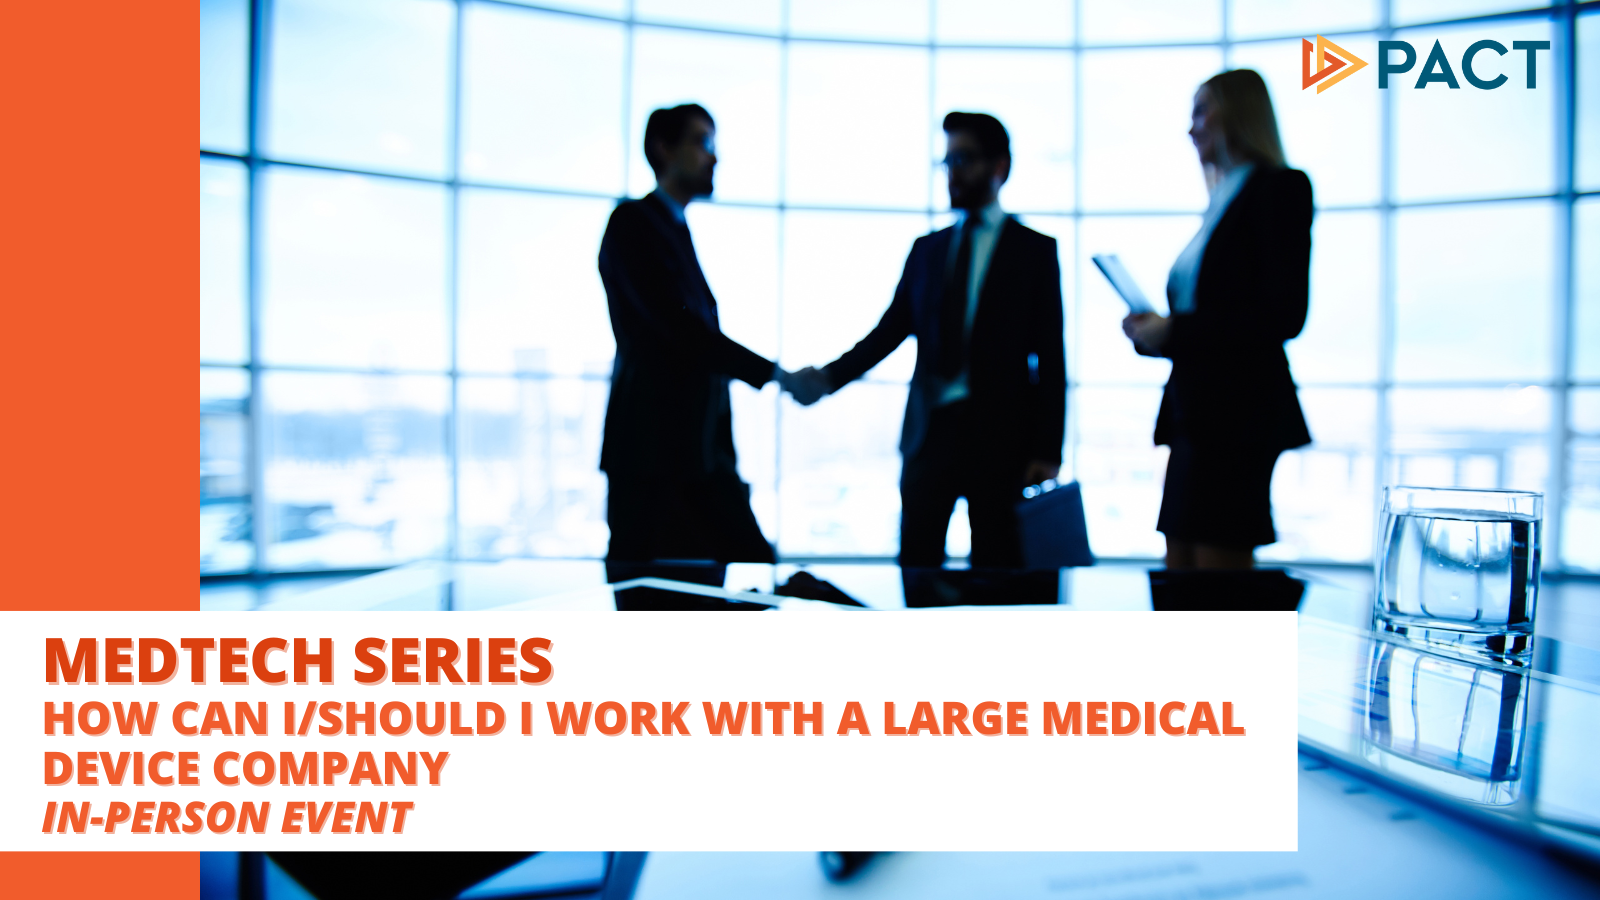 How Can I/Should I Work With a Large Medical Device Company